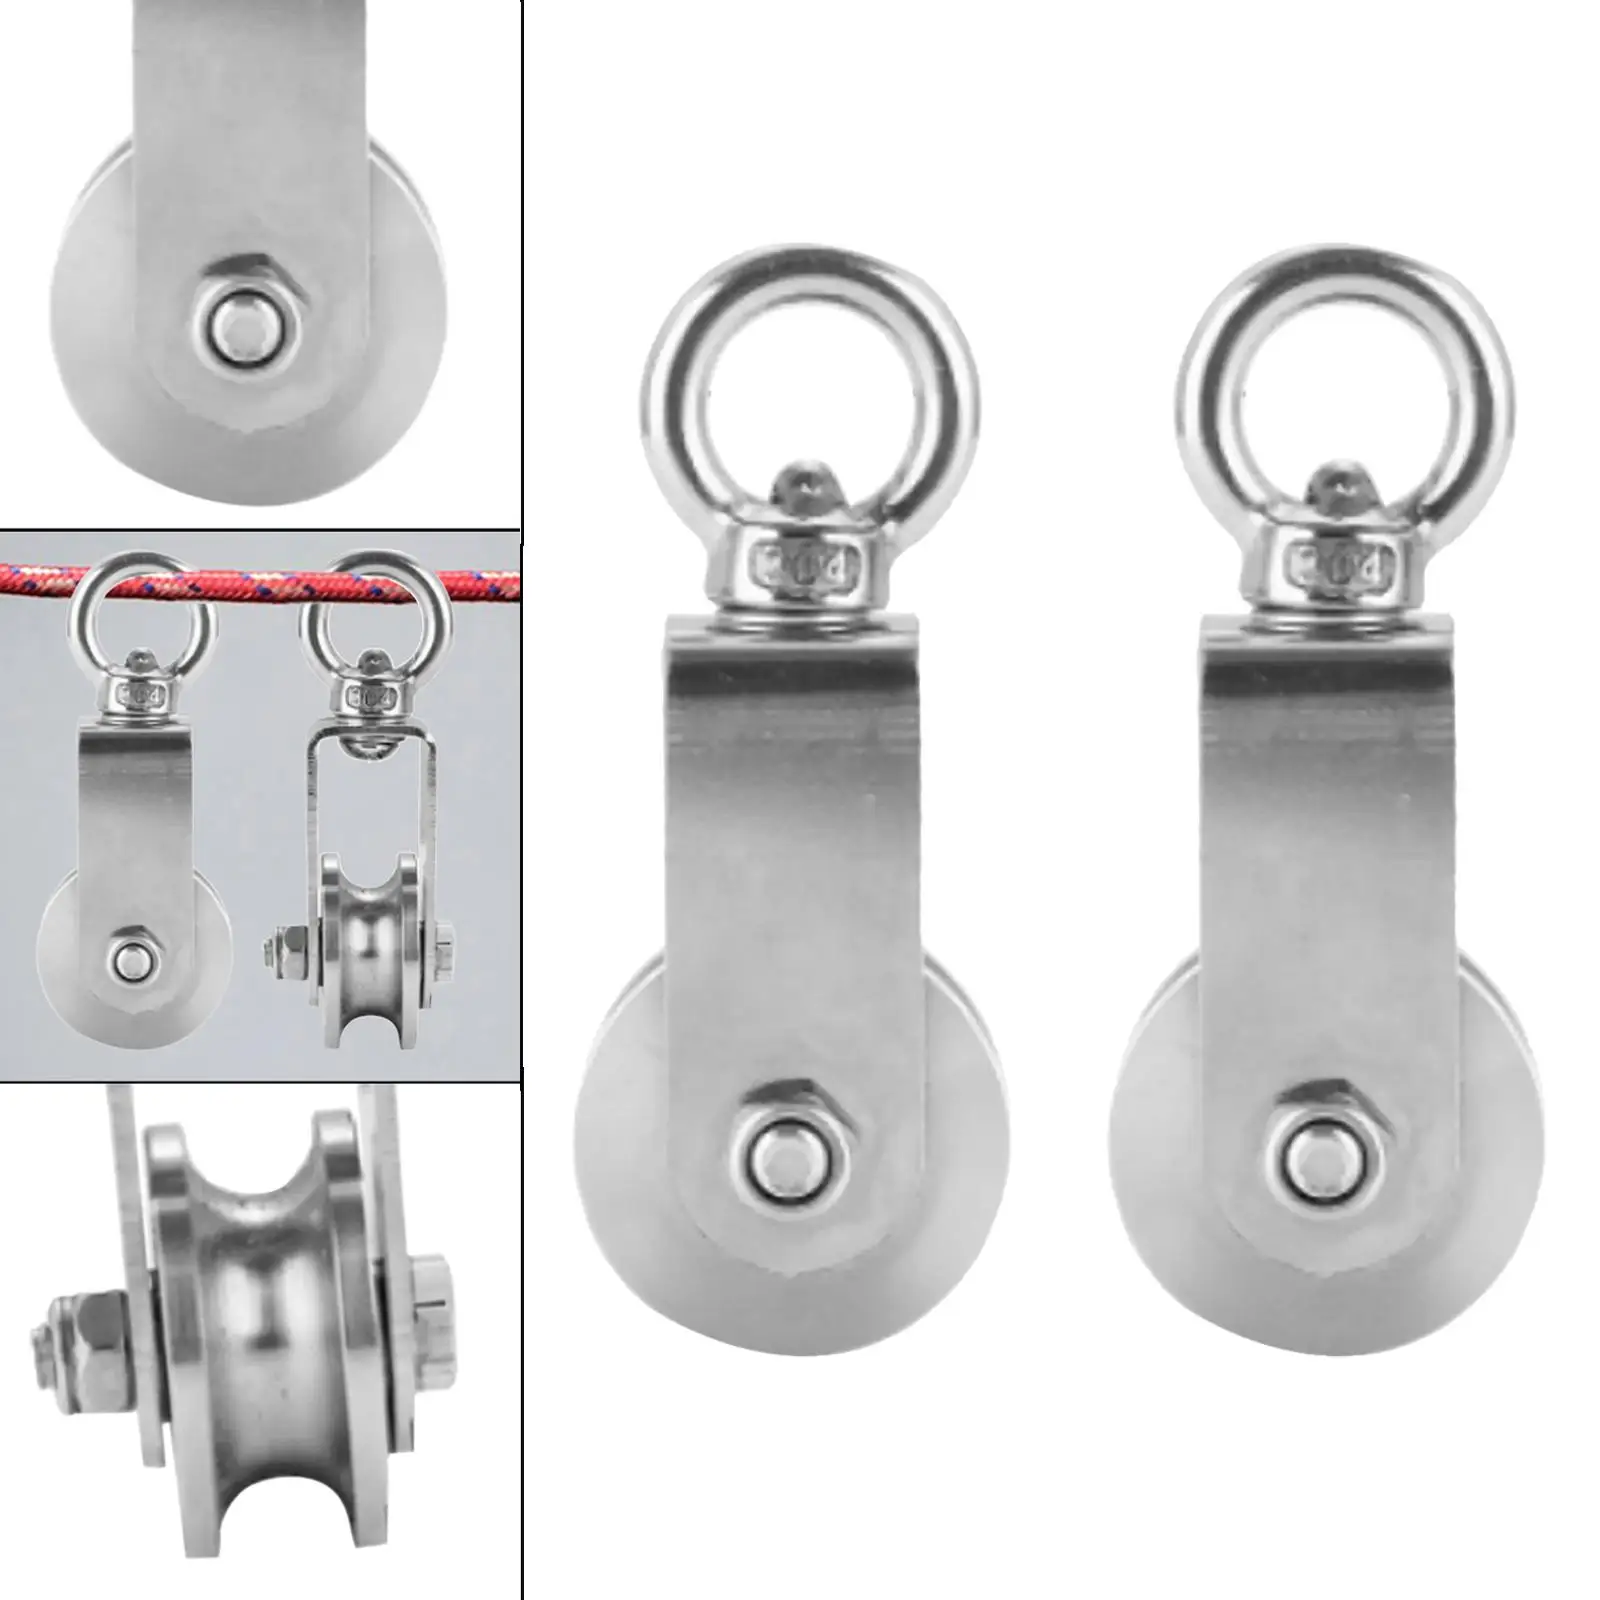 2Pcs Stainless Steel Swivel Pulley Block Gym Equipment Smooth Cable Pulley Wheel Pulley for Gym Wire Maintenance DIY Attachment